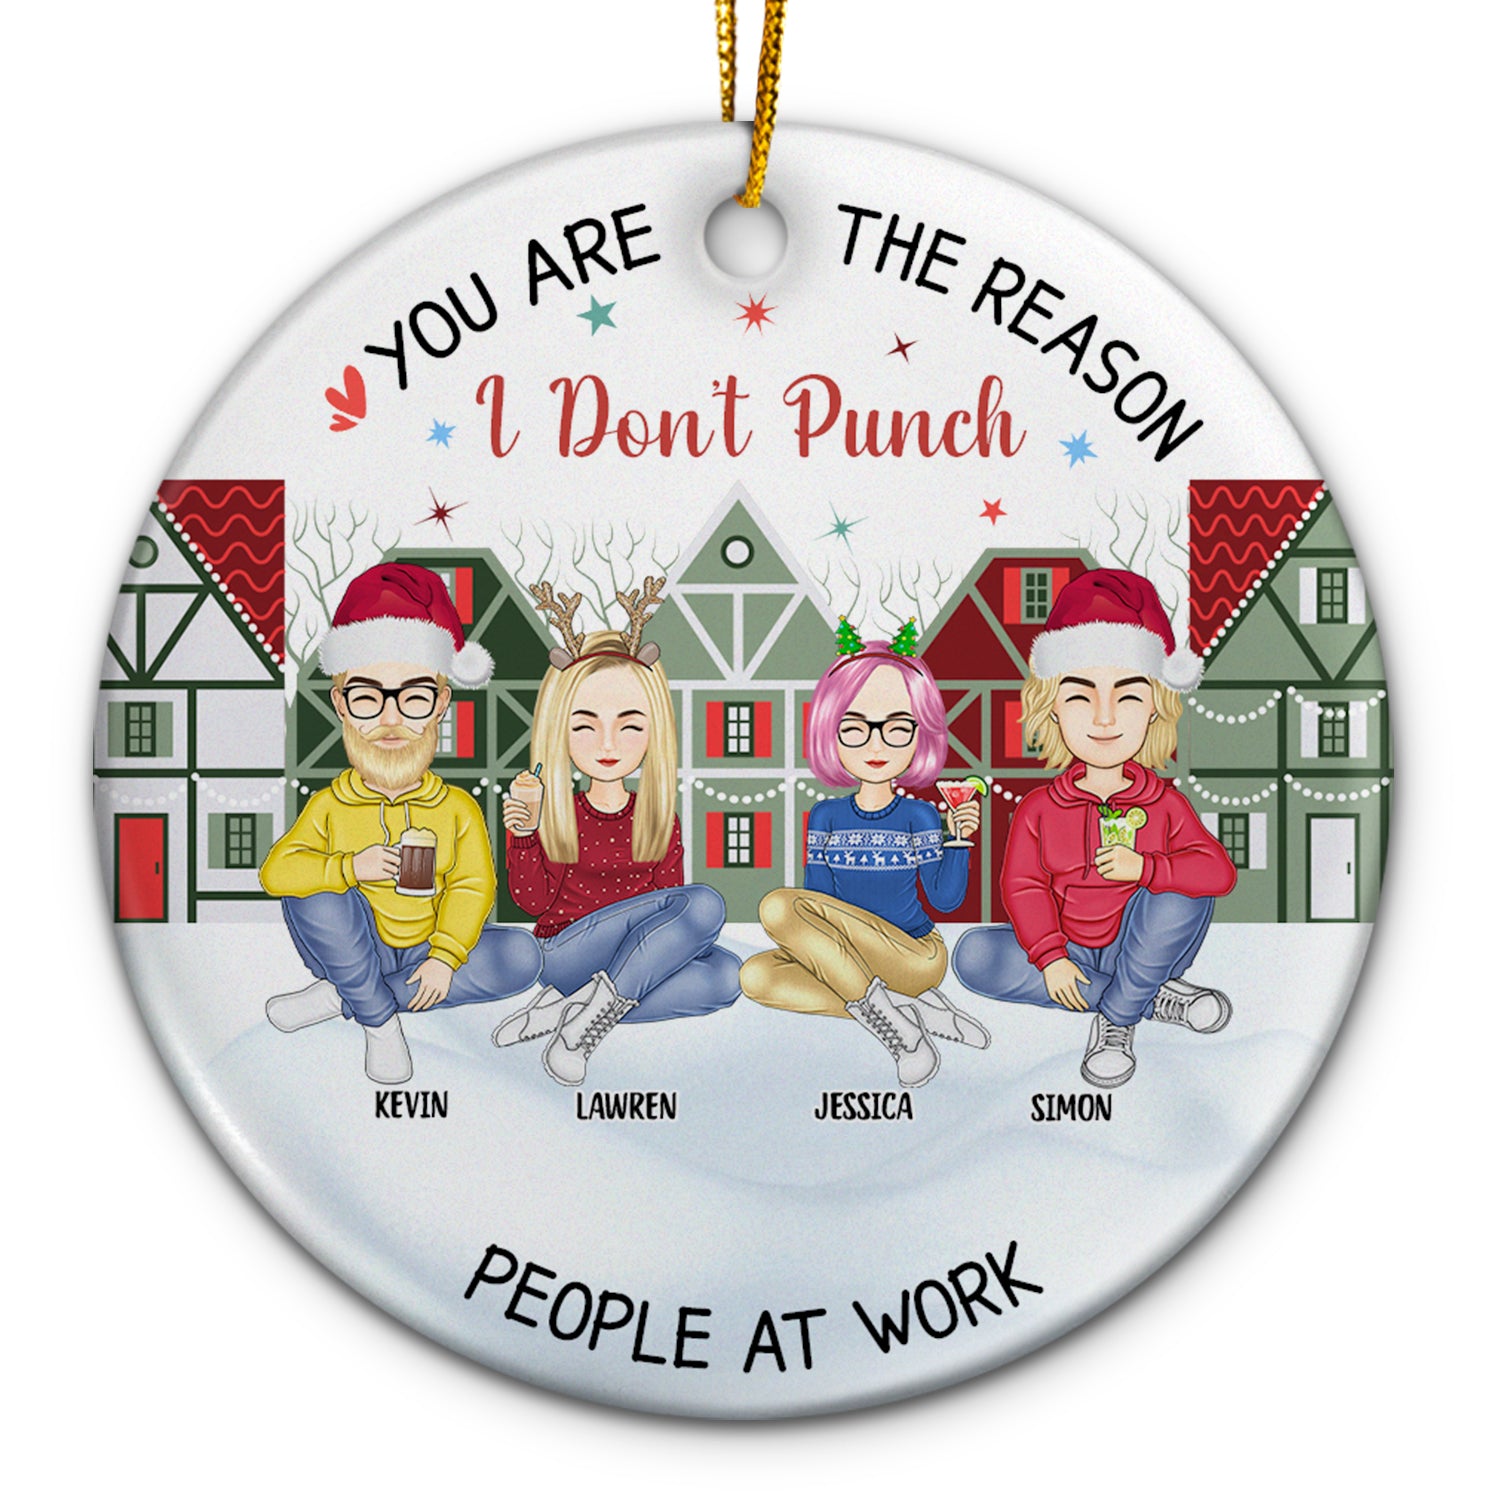 Christmas Colleagues You Are The Reason I Don't Punch People - Gift For Co-worker - Personalized Circle Ceramic Ornament